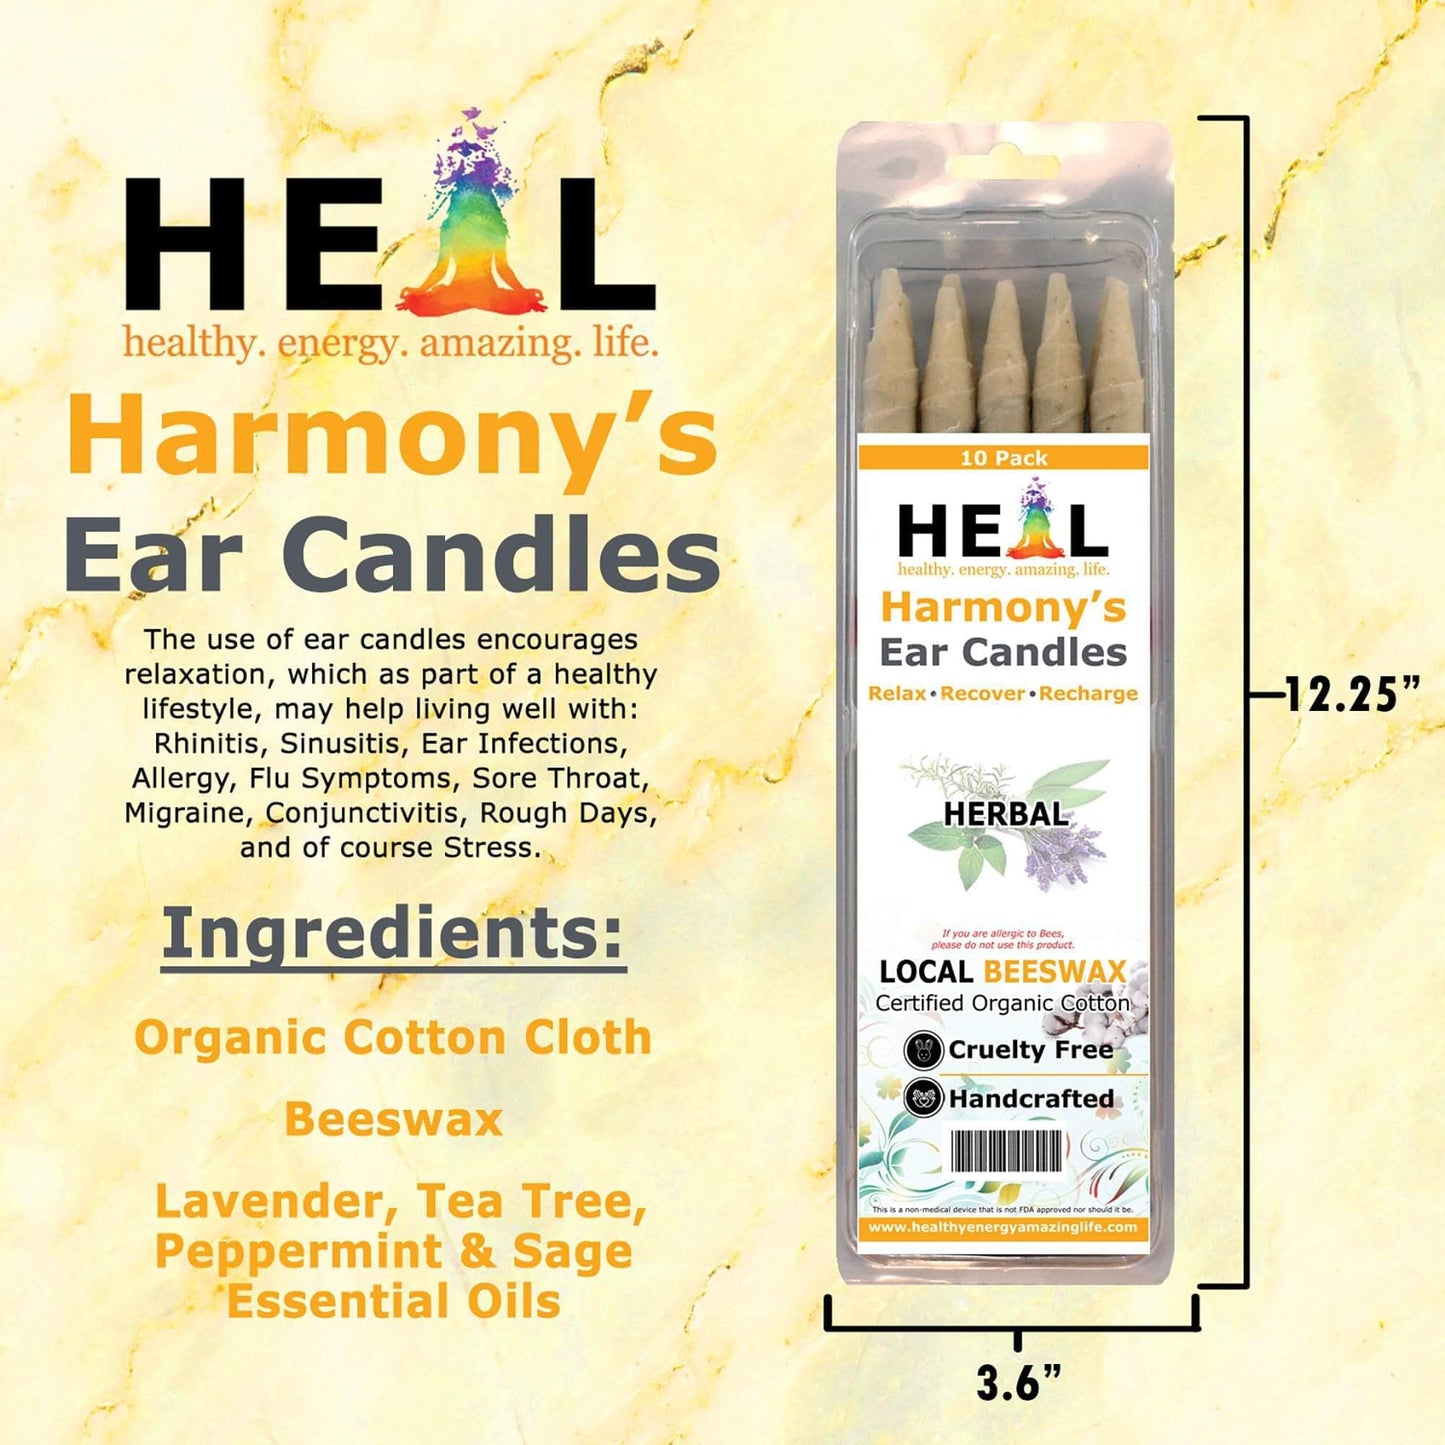 Herbal Beeswax Ear Candles by Doc Harmony